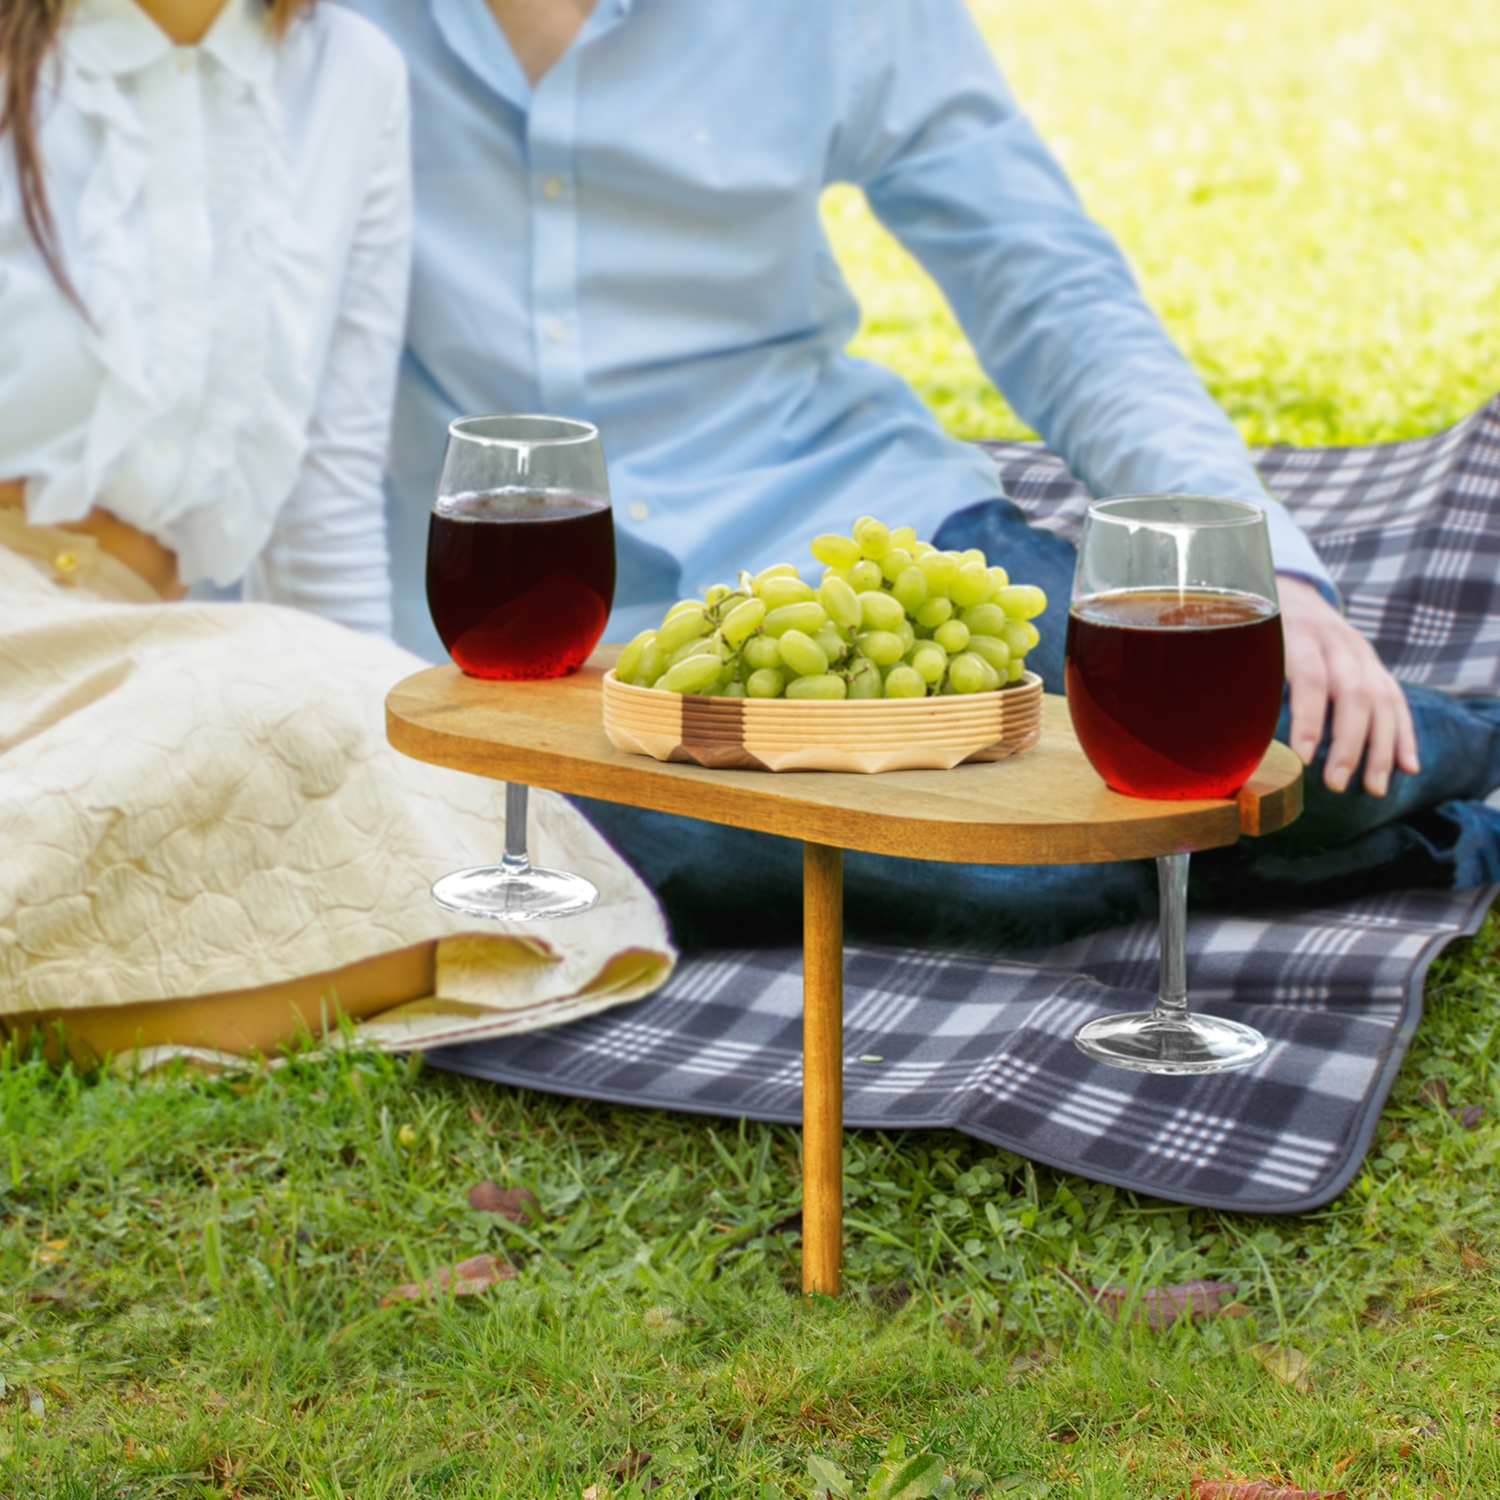 Picnic Serving Board Features